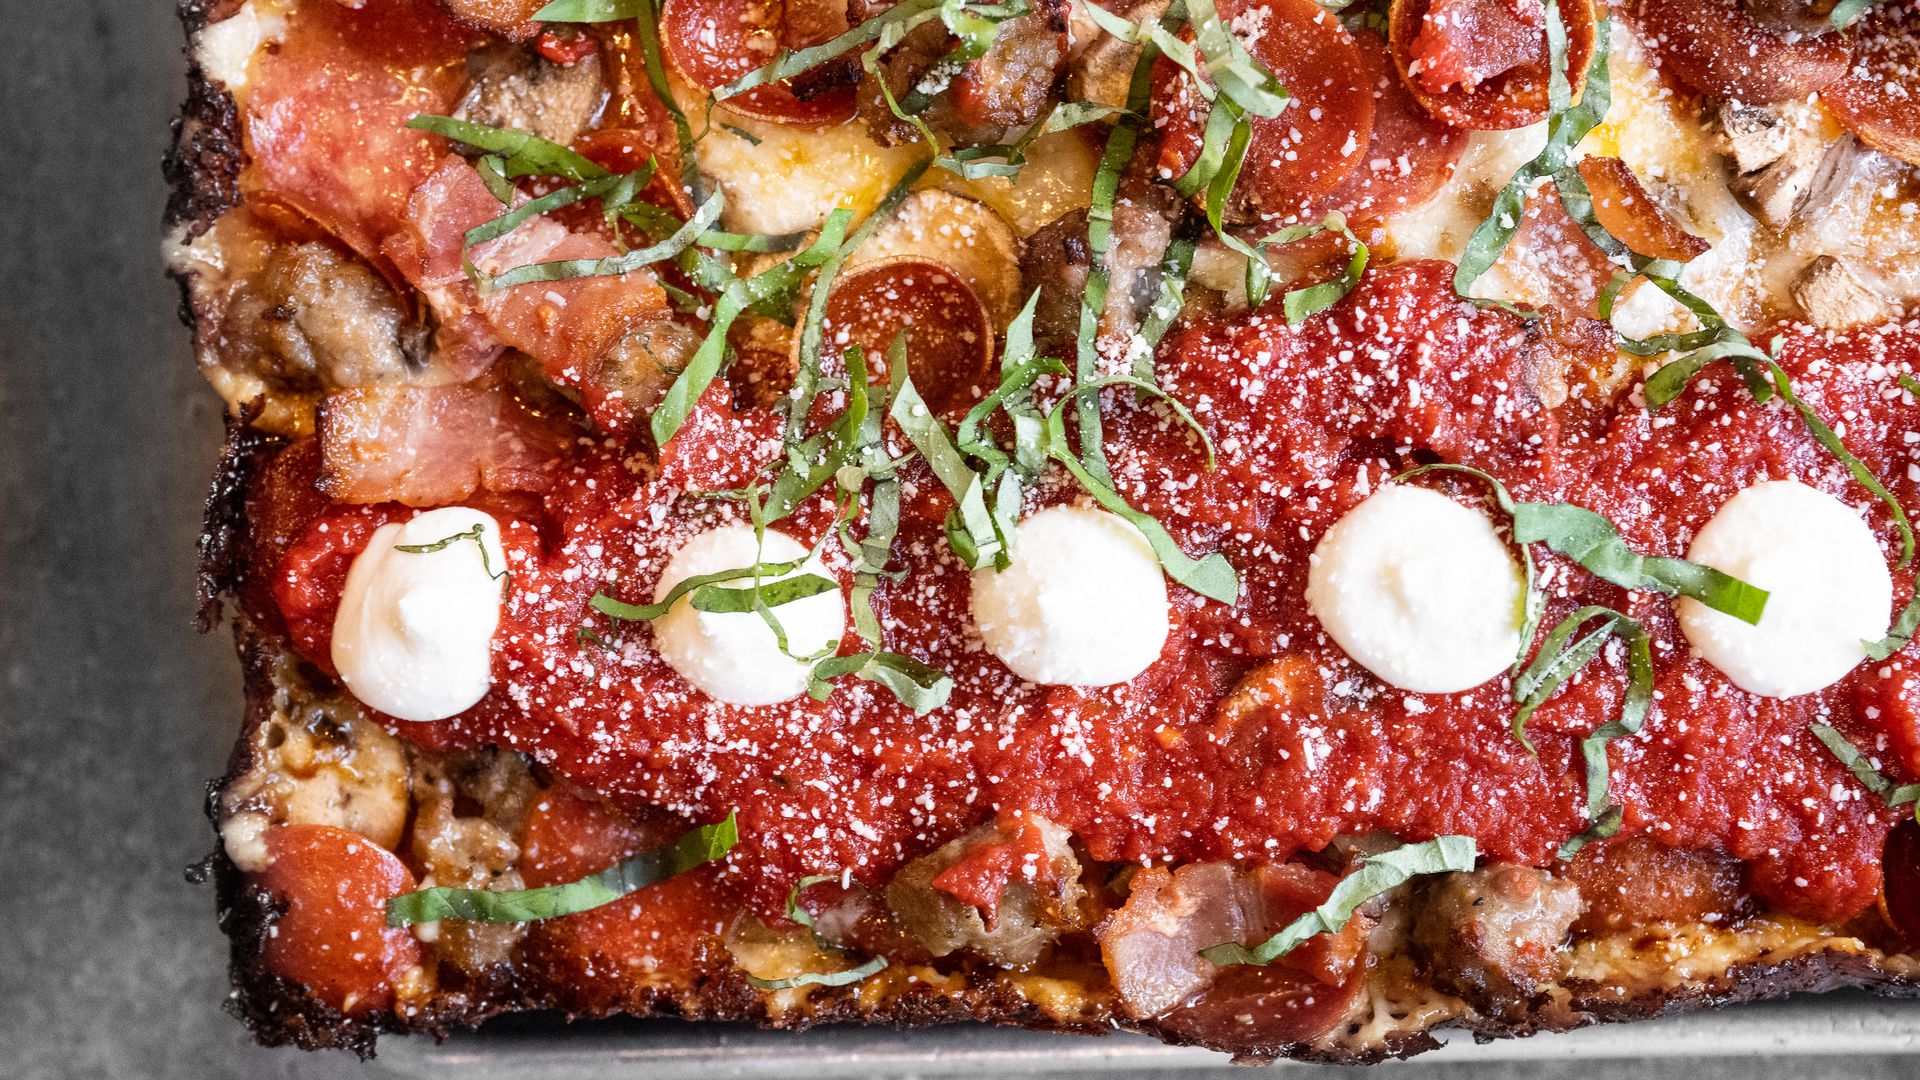 one of san francisco’s most famous pizzerias just launched a pizza tasting menu